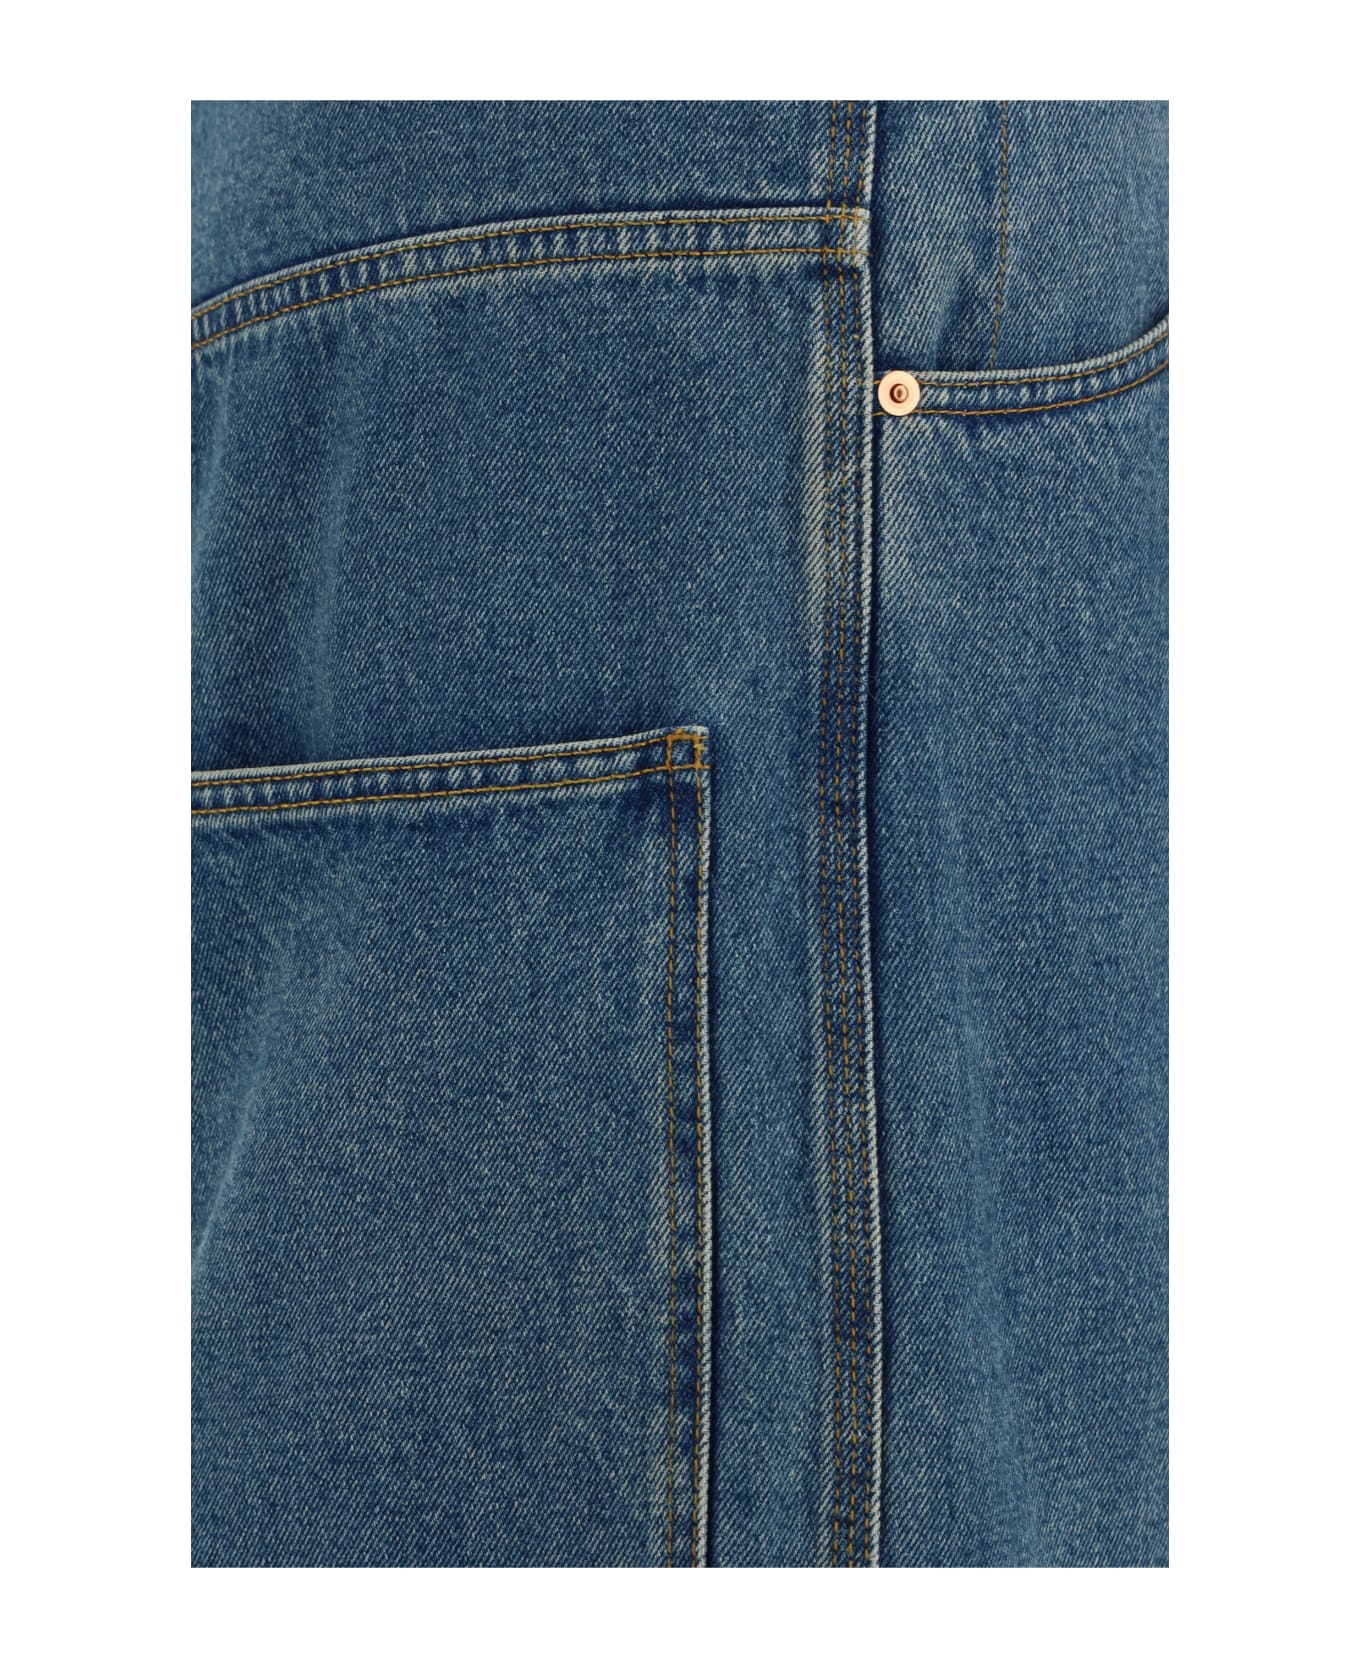 Gucci Jeans - Blue ボトムス